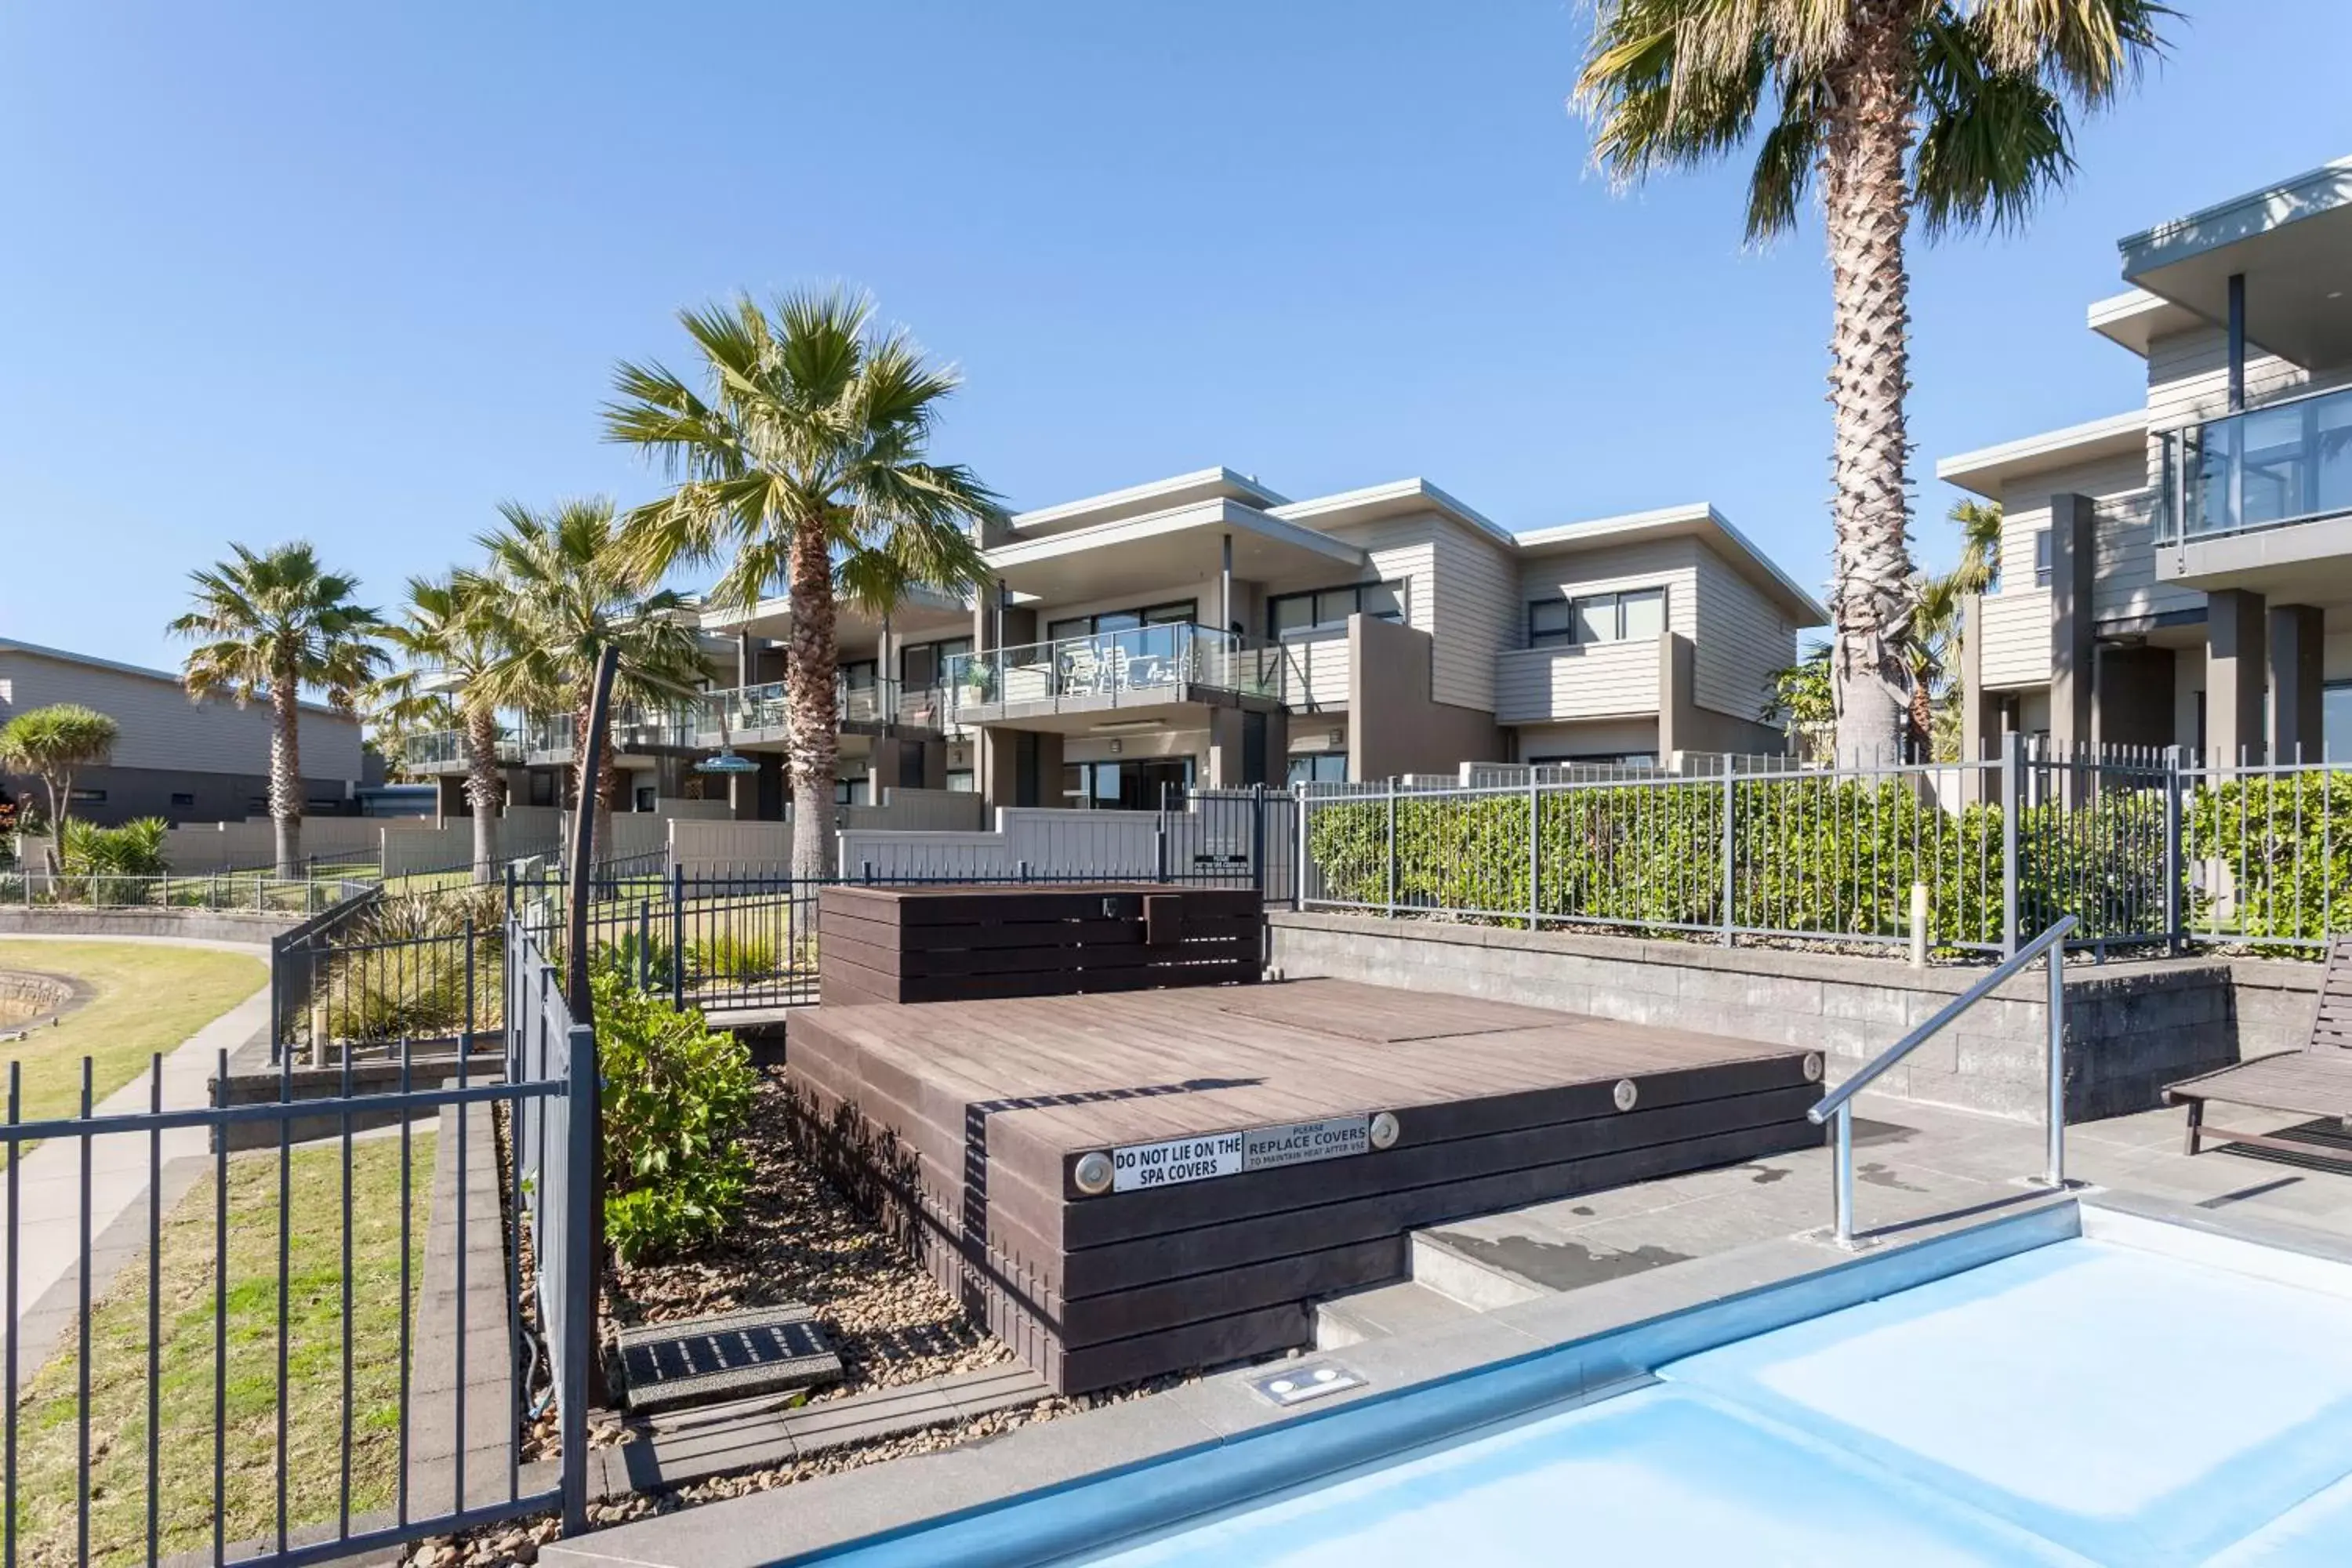 Property building, Swimming Pool in Sovereign Pier On The Waterways